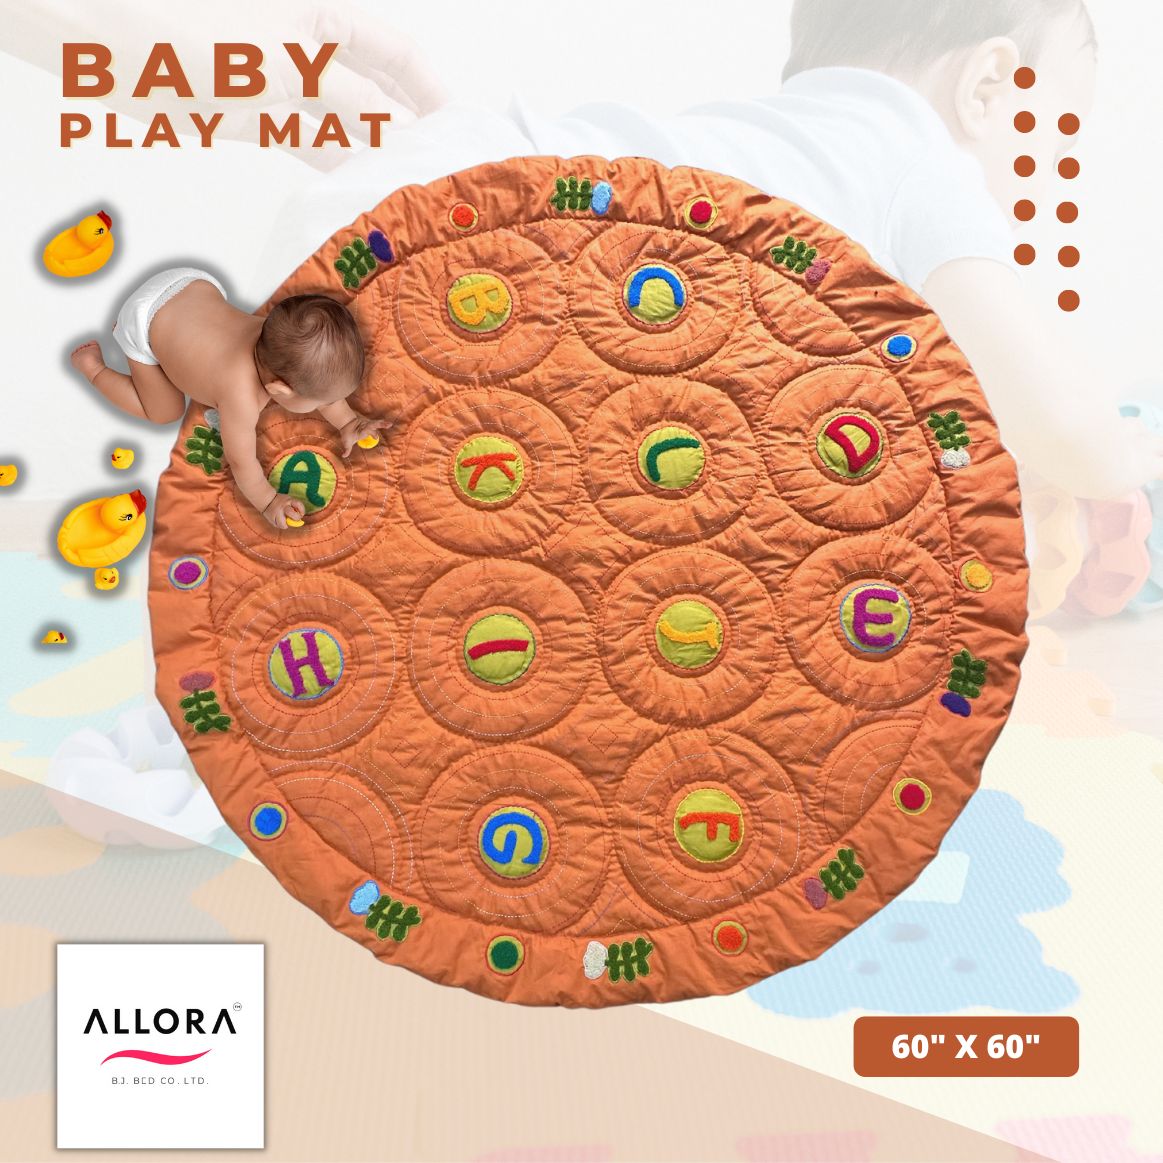 Baby learning playing mat for newborn kids